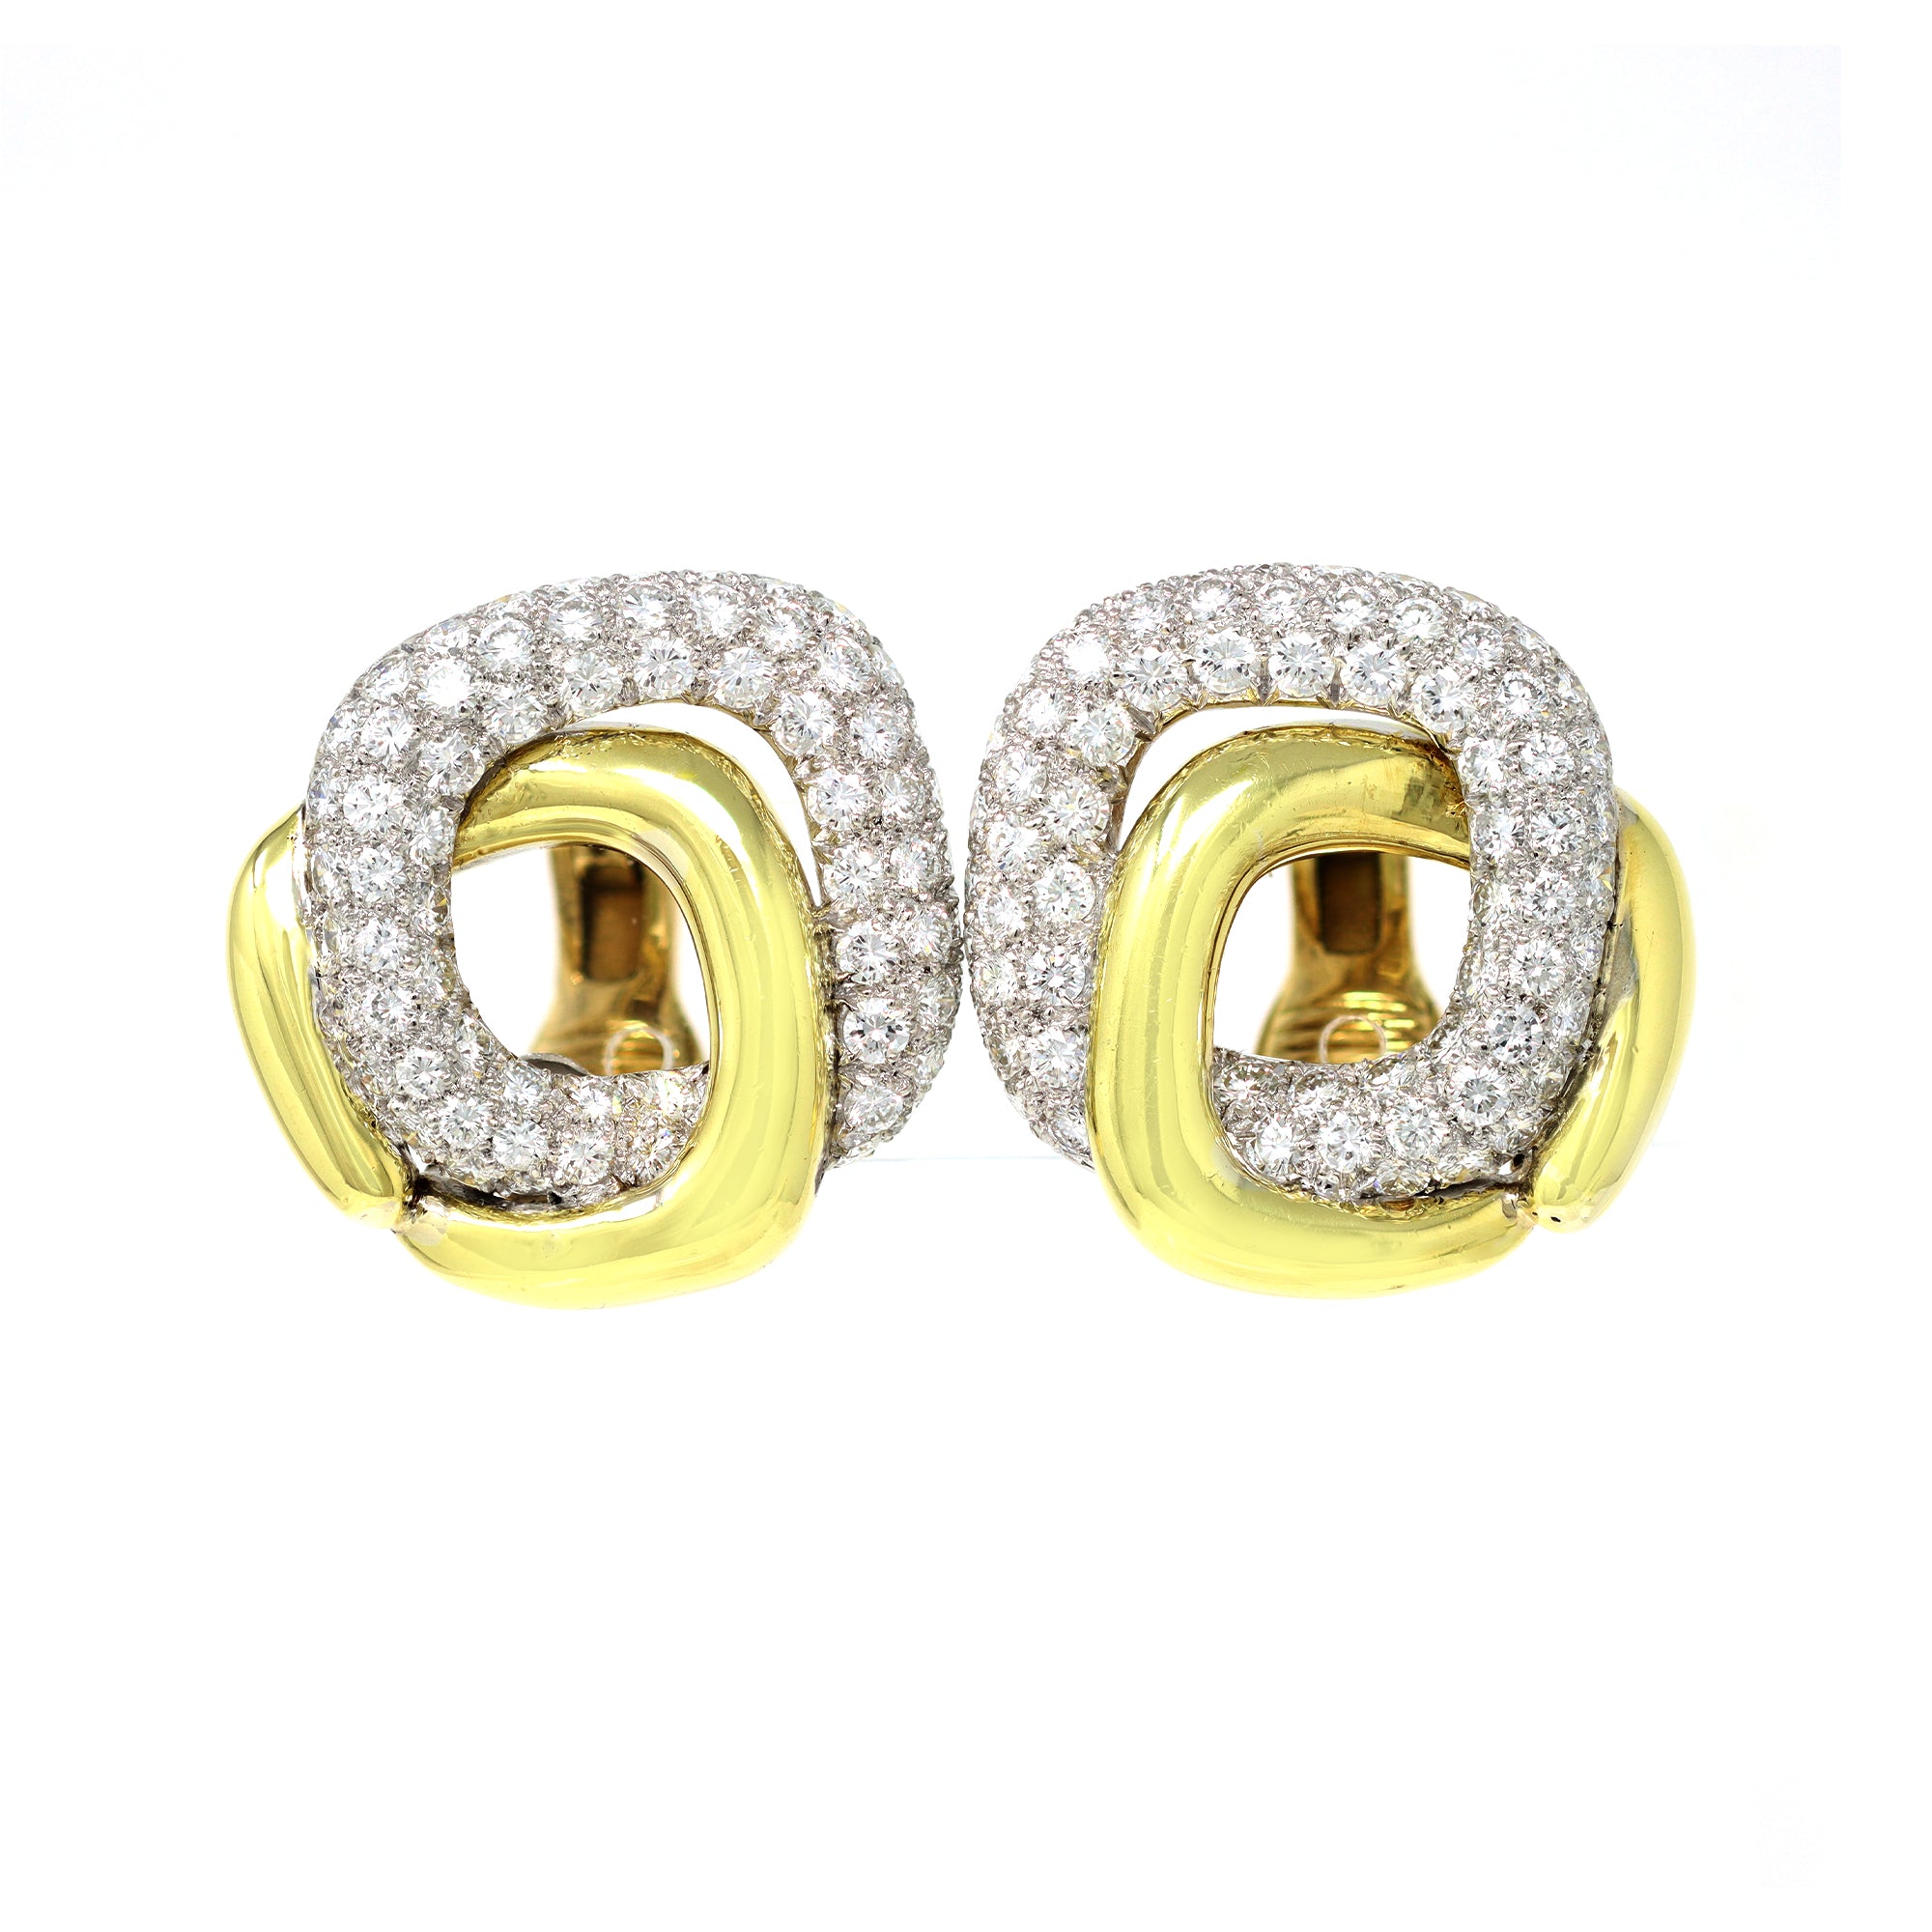 circa 1970 diamond 18 karat yellow gold and platinum clip-on earrings front view